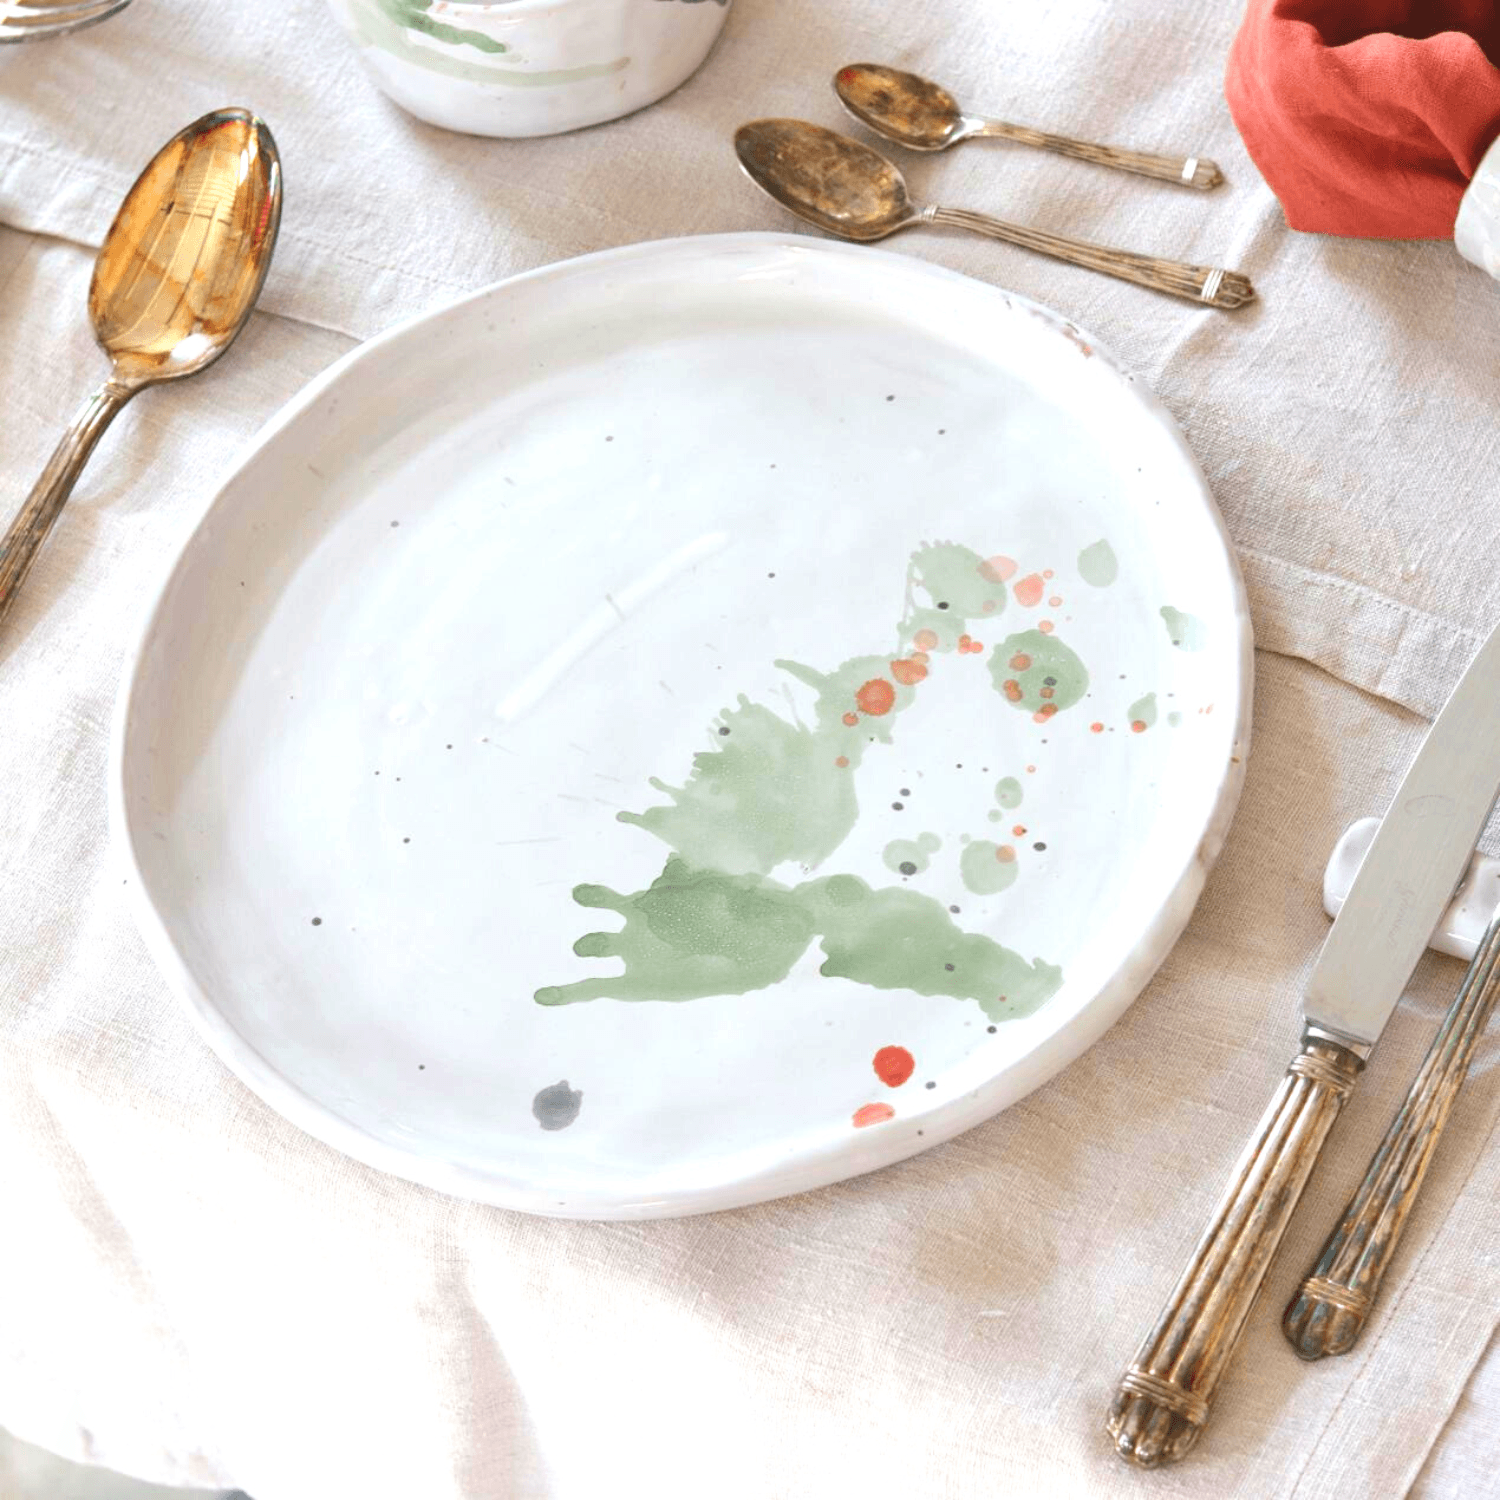 Ceramic Handmade Dinnerplate in a Watercolour Aesthetic - VirtuousWares:Global